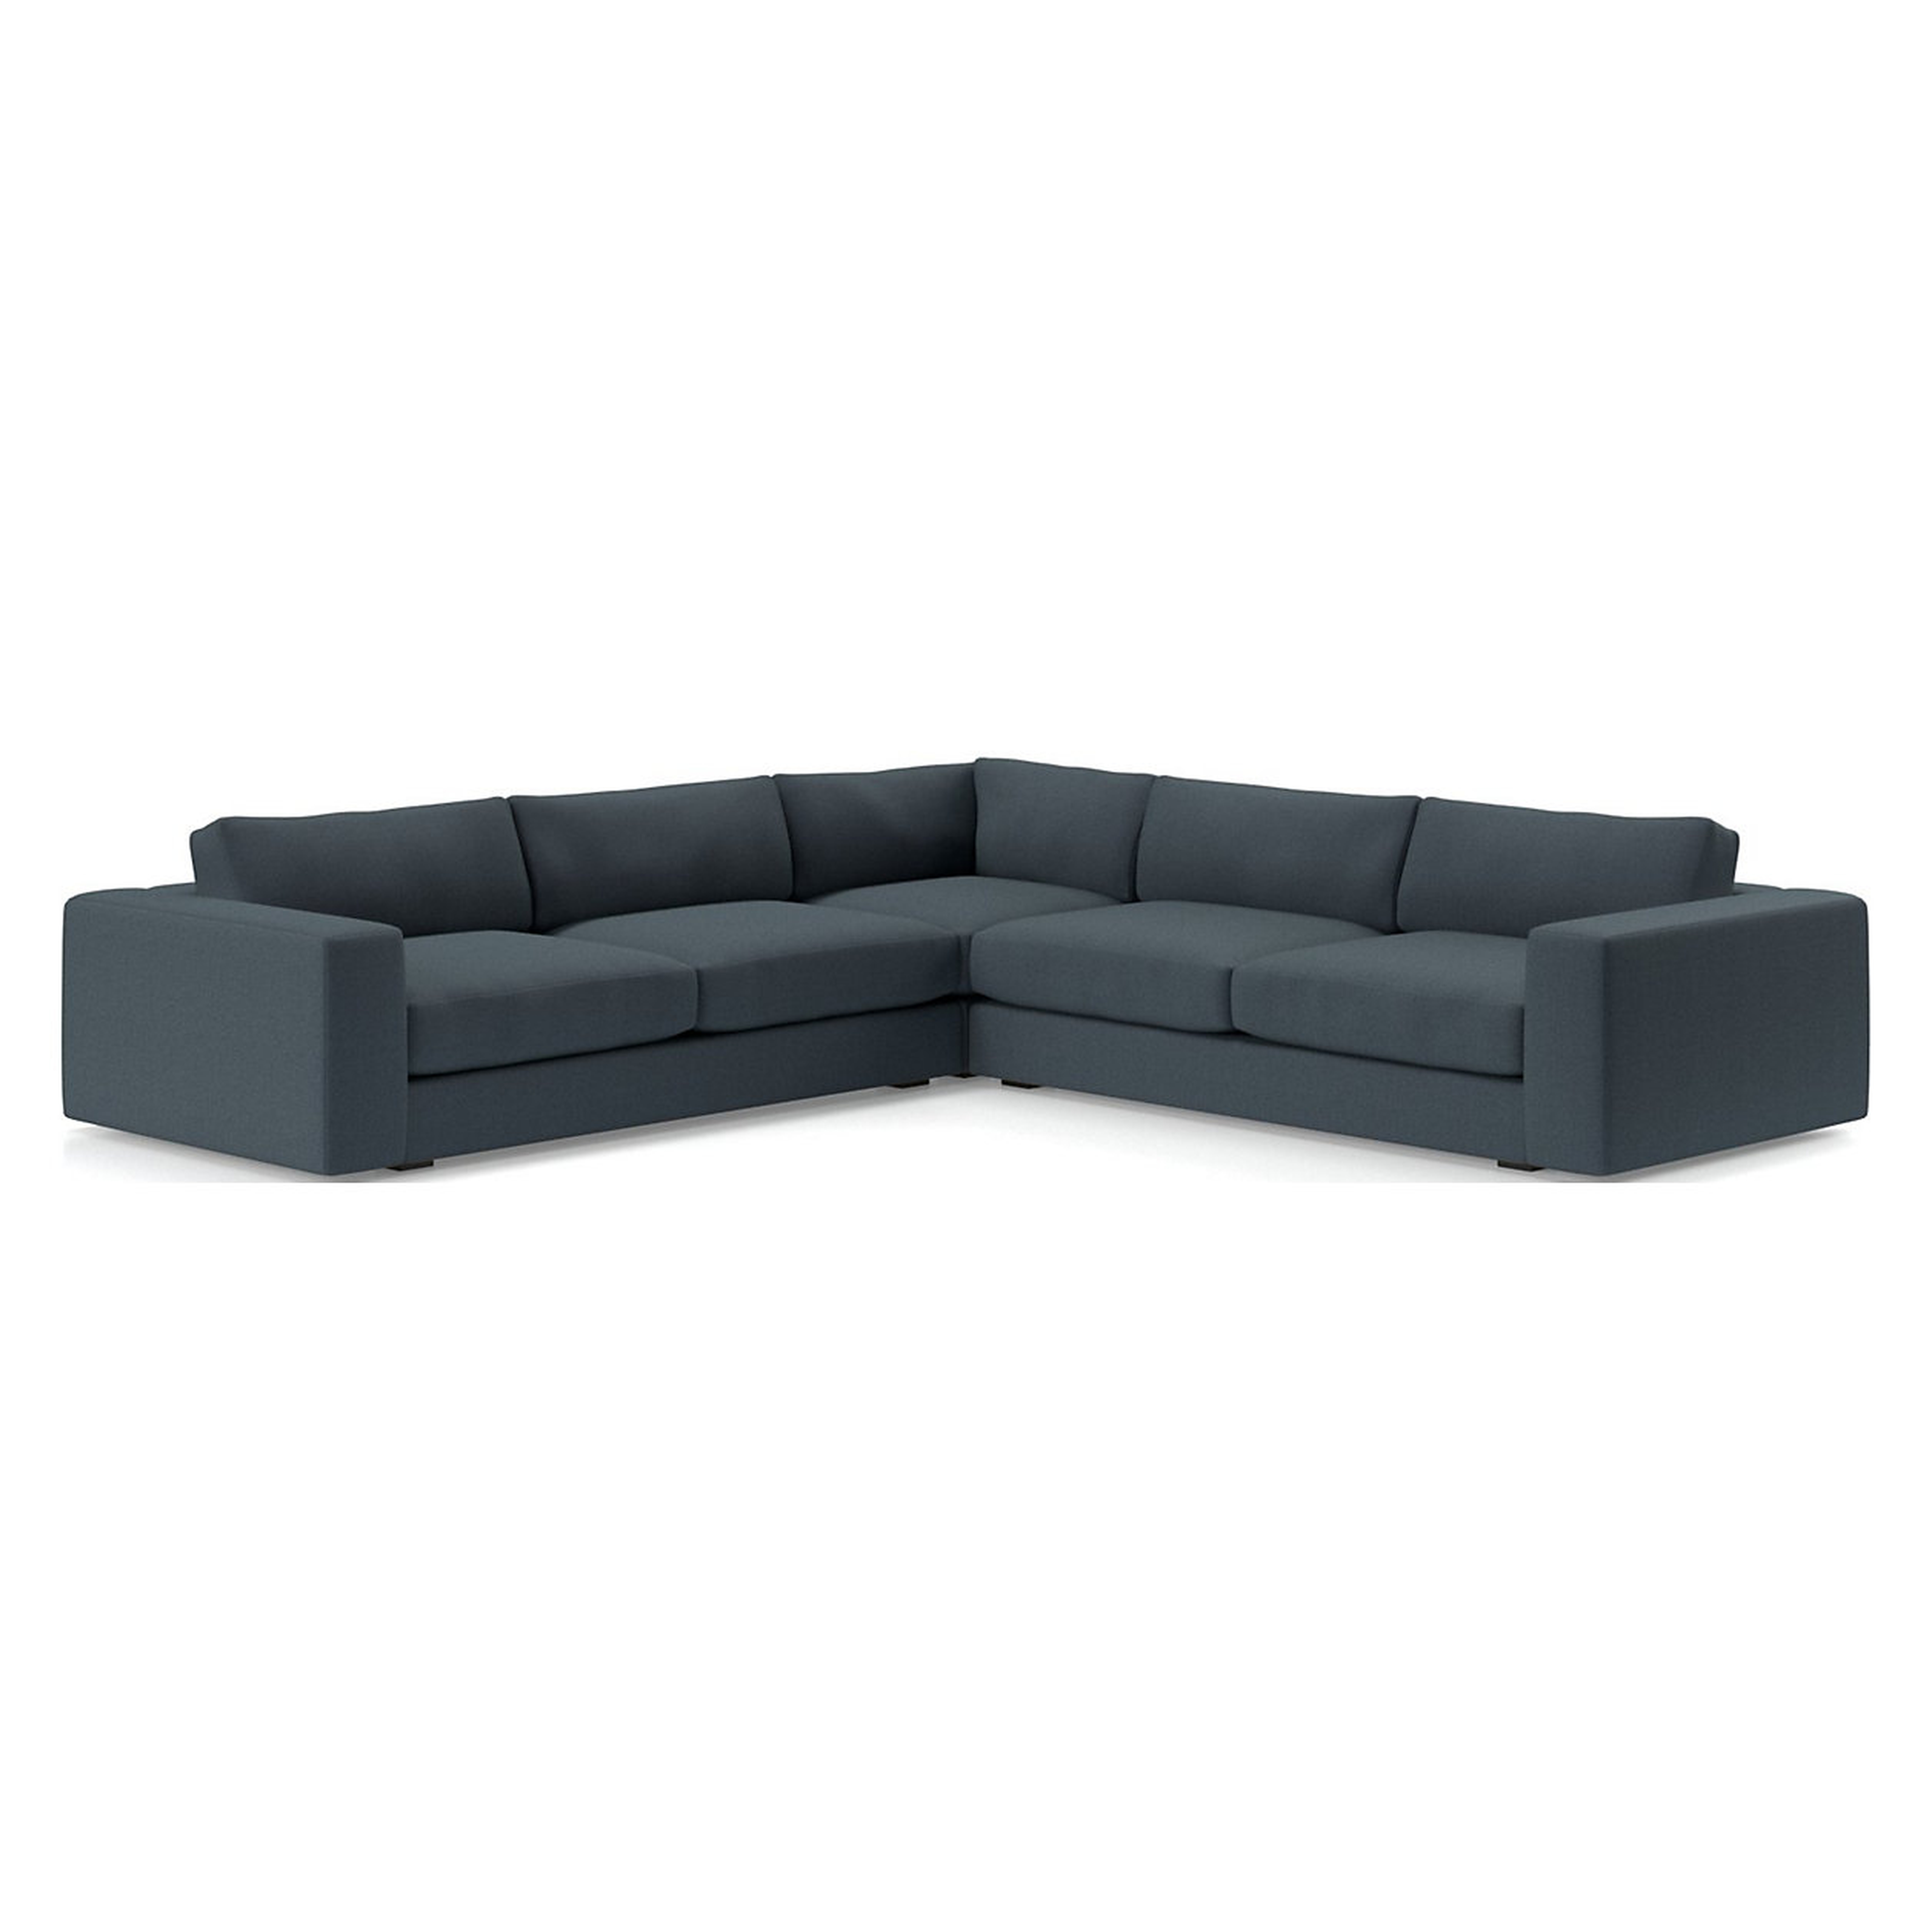 Oceanside 3-Piece Corner Sectional - Crate and Barrel